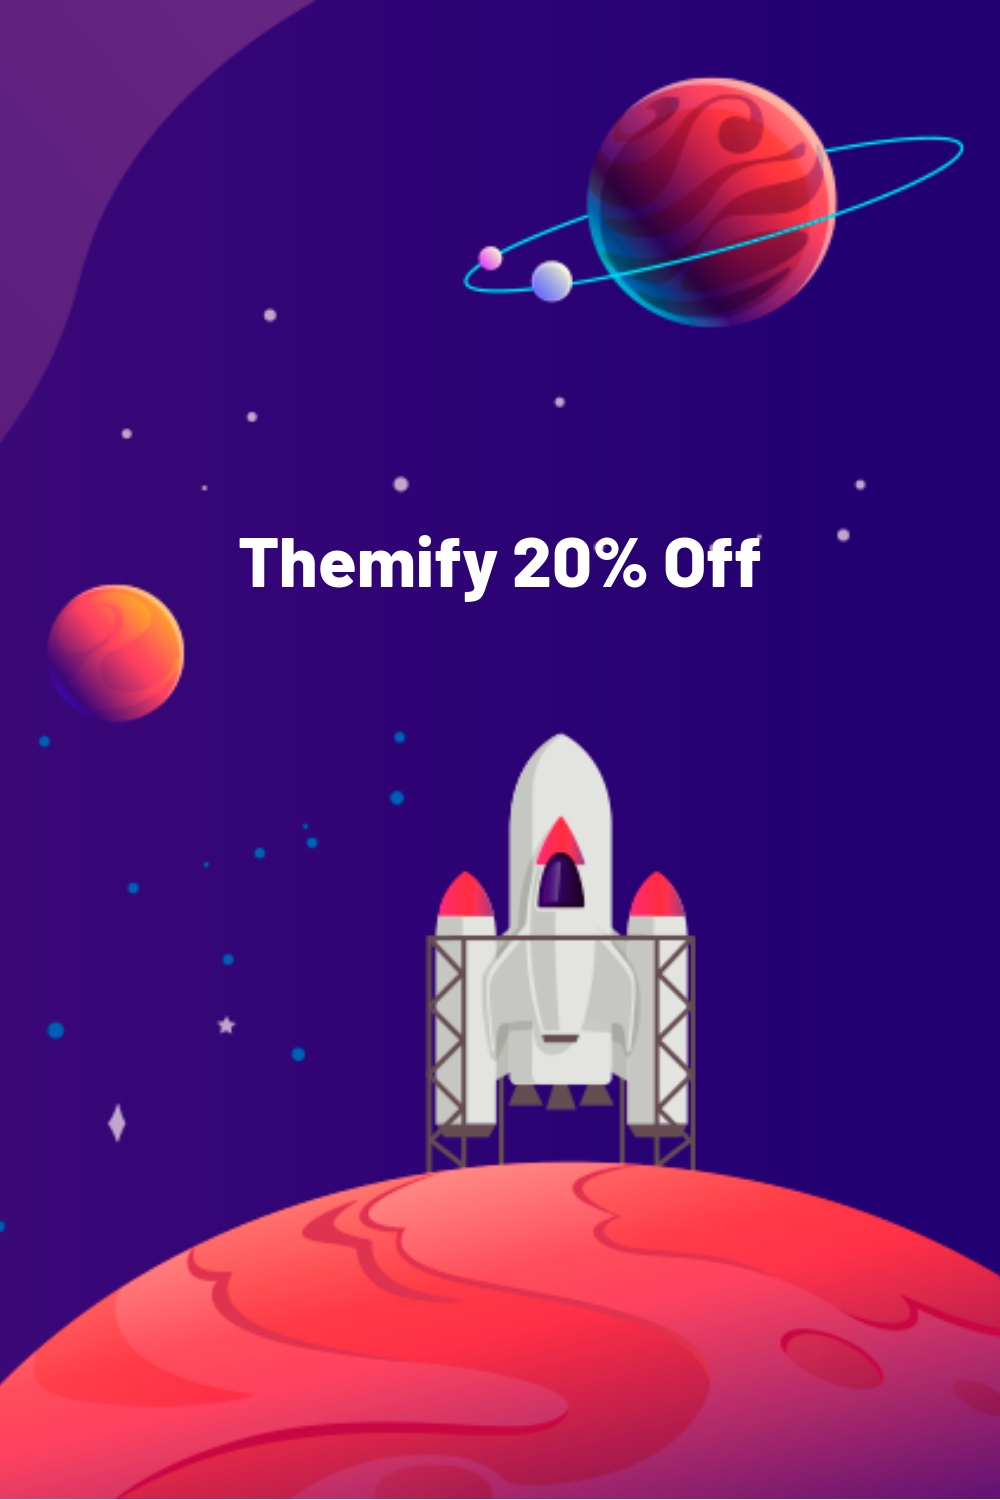 Themify 20% Off